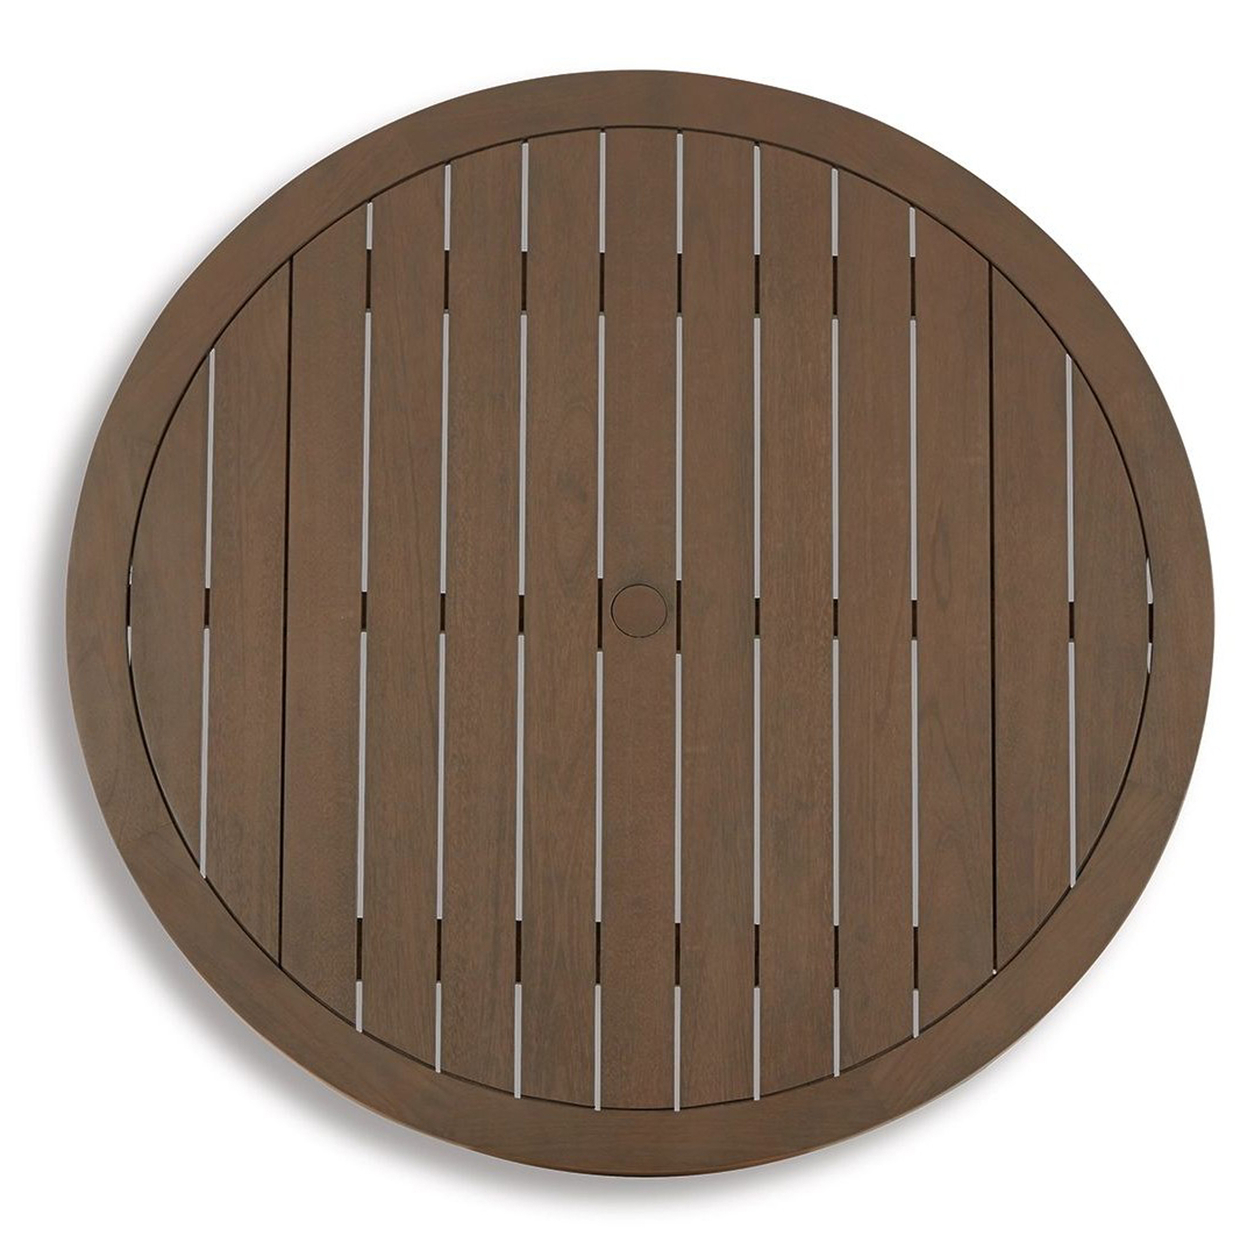 46 Inch Outdoor Round Dining Table, Umbrella Hole, Slatted Tabletop, Brown- Saltoro Sherpi